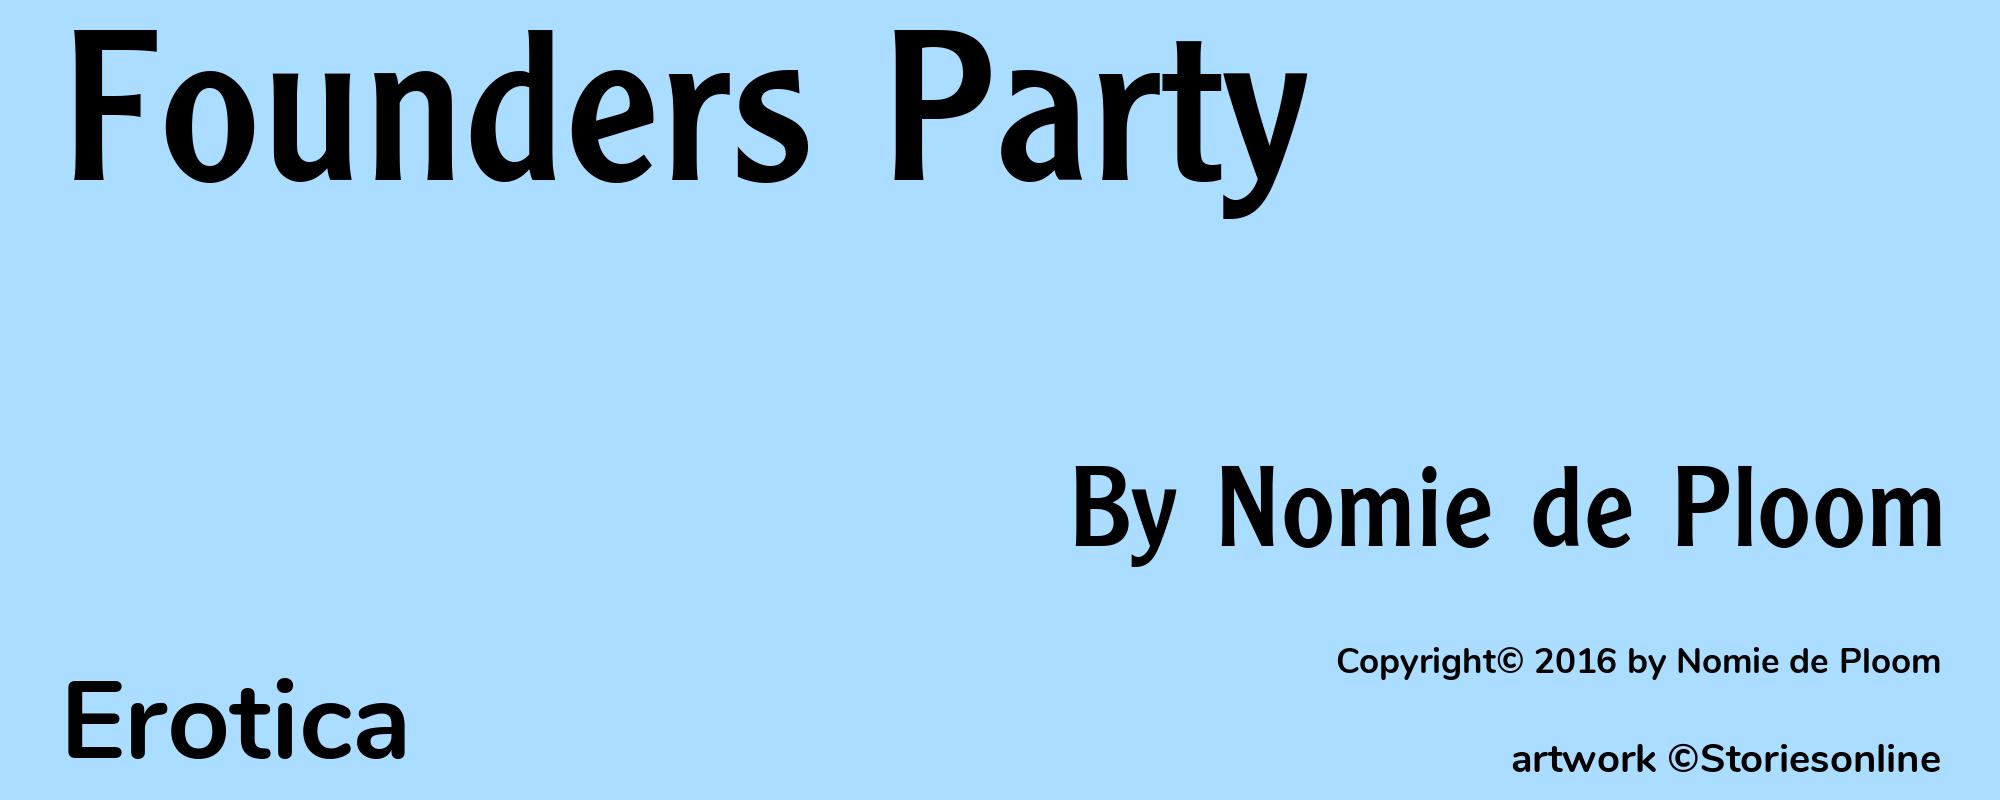 Founders Party - Cover